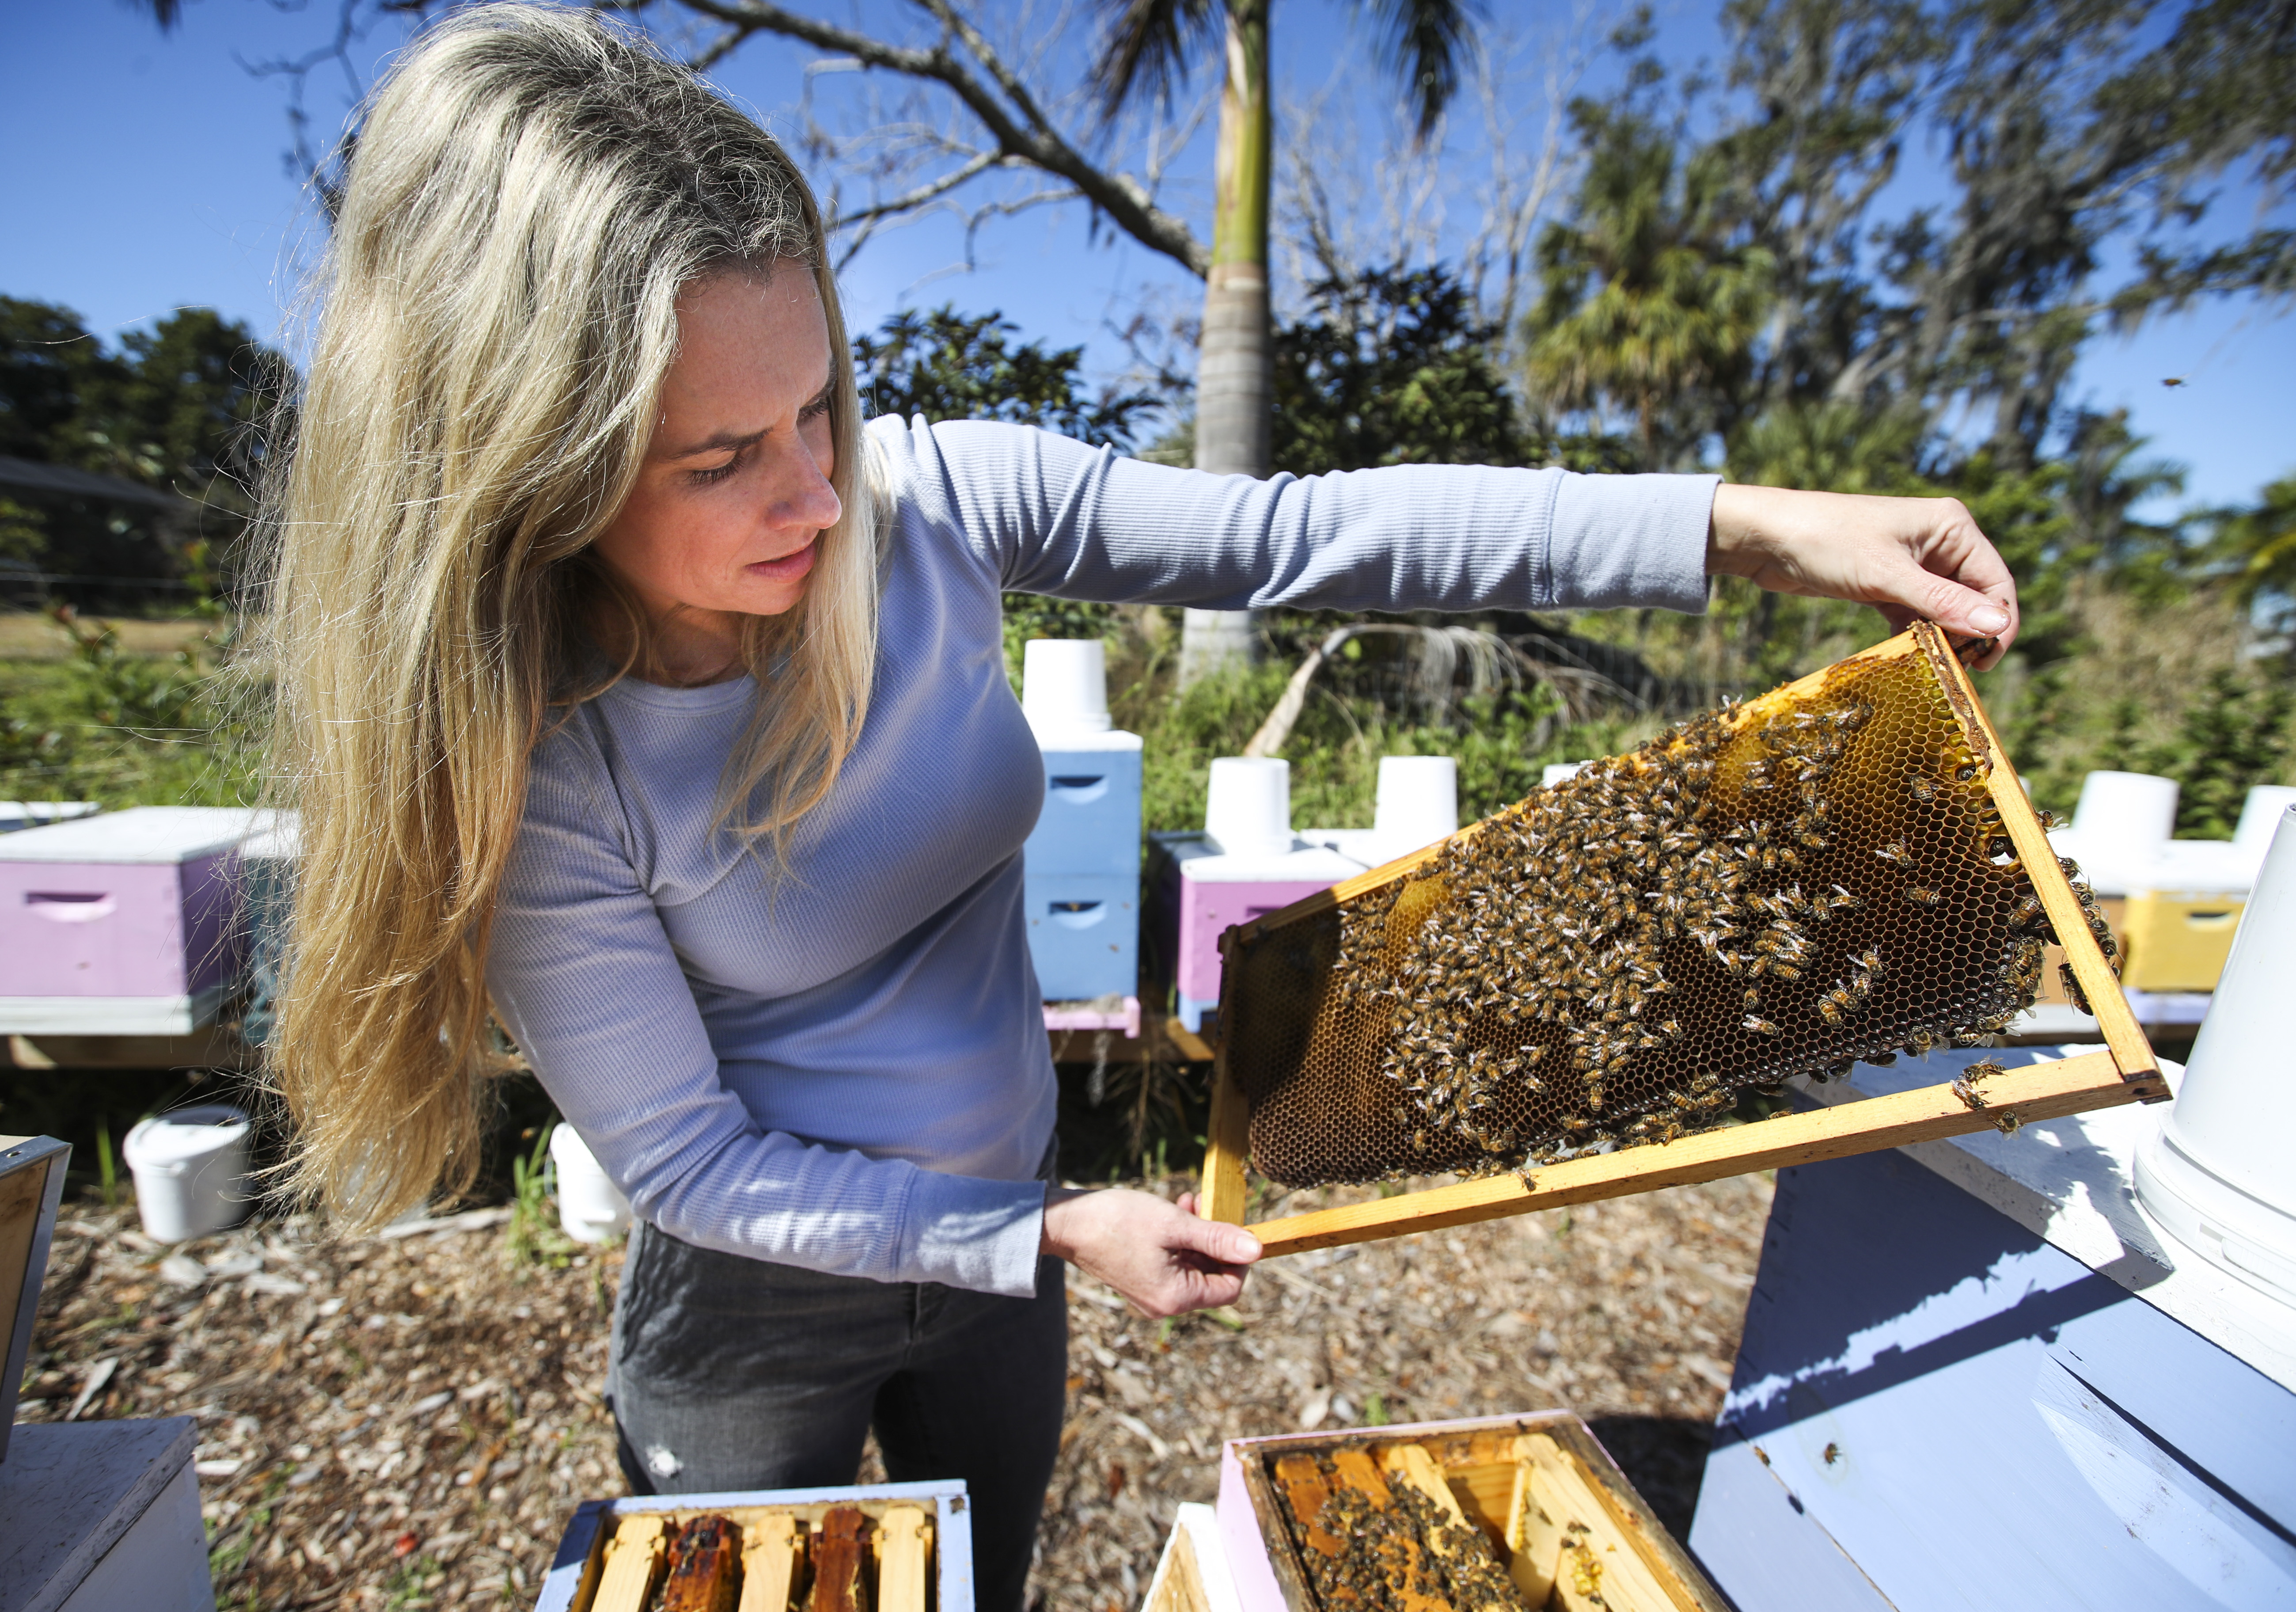 Tampa Bay's TikTok-famous beekeeper finds success with sweat and honey